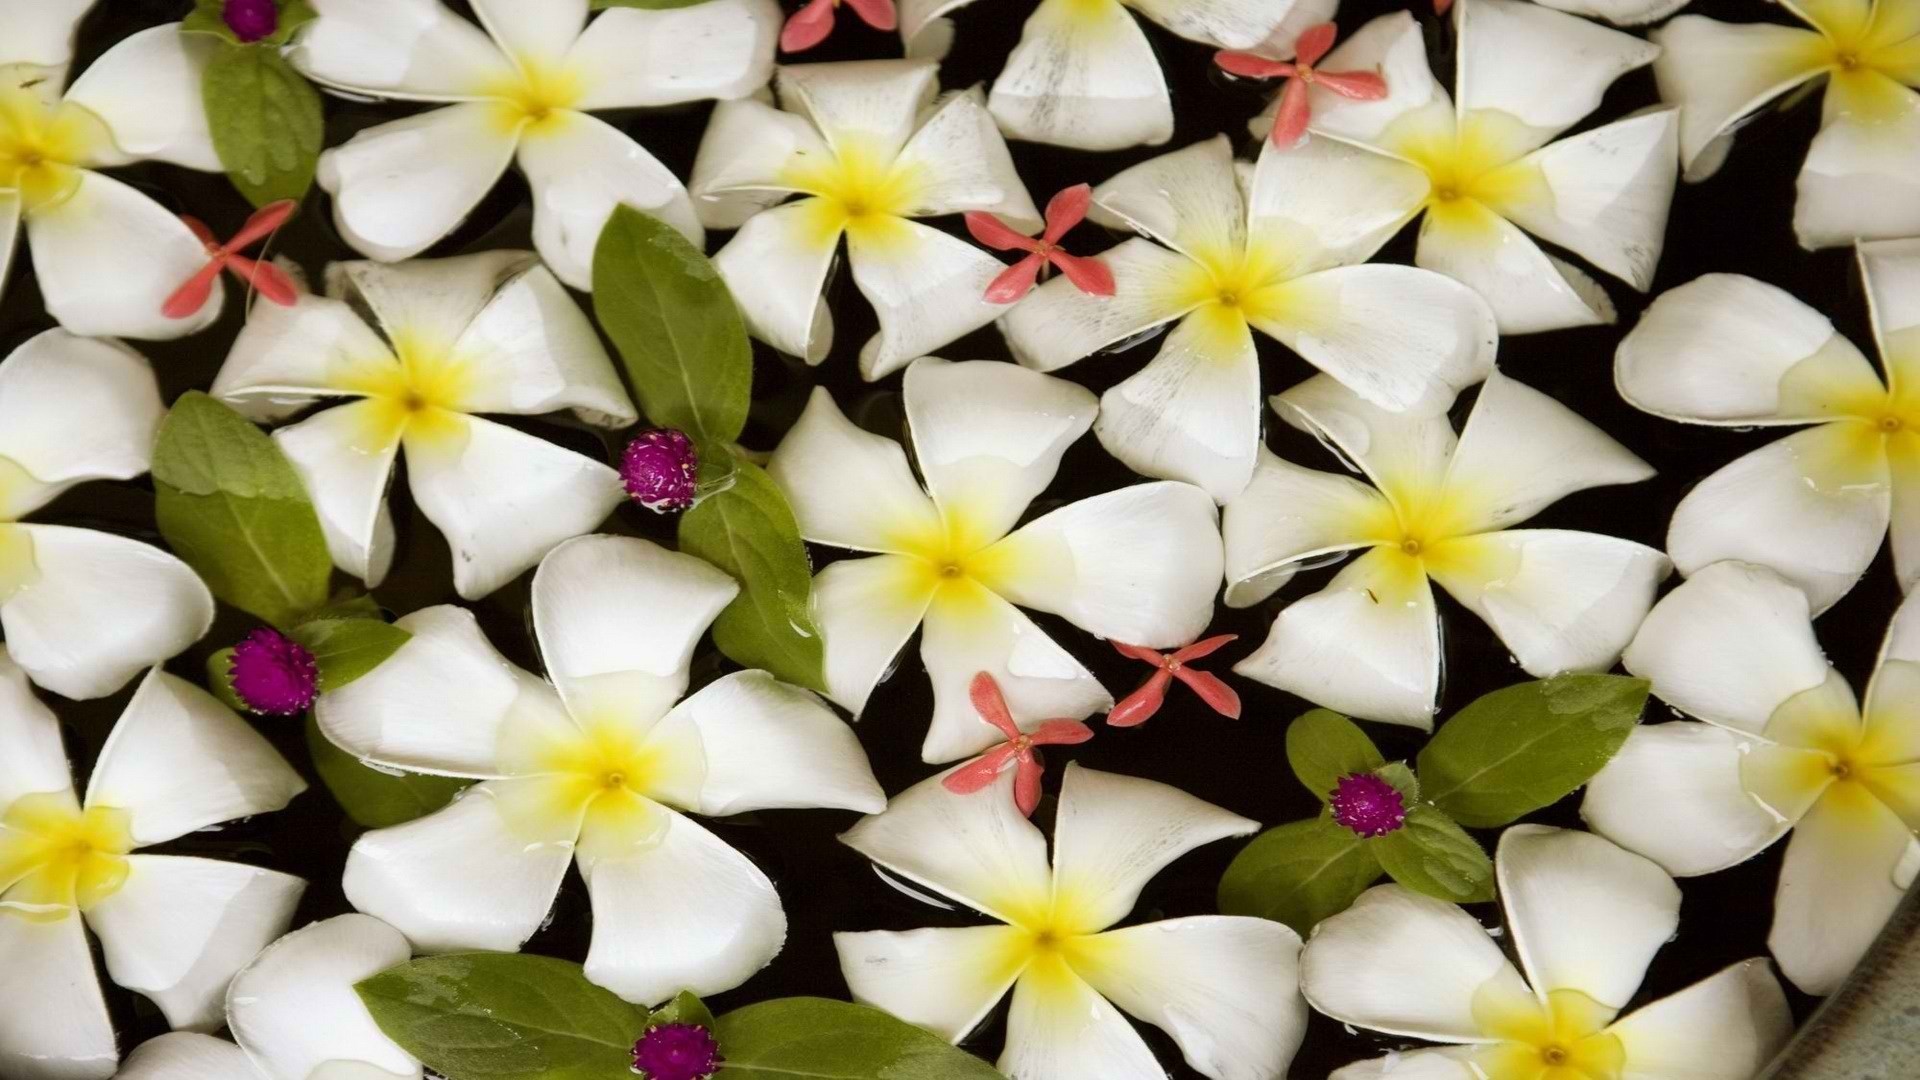 1920x1080 Get the latest plumeria, flowers, water news, pictures and videos and learn  all about plumeria, flowers, water from wallpapers4u.org, your wallpaper  news ...